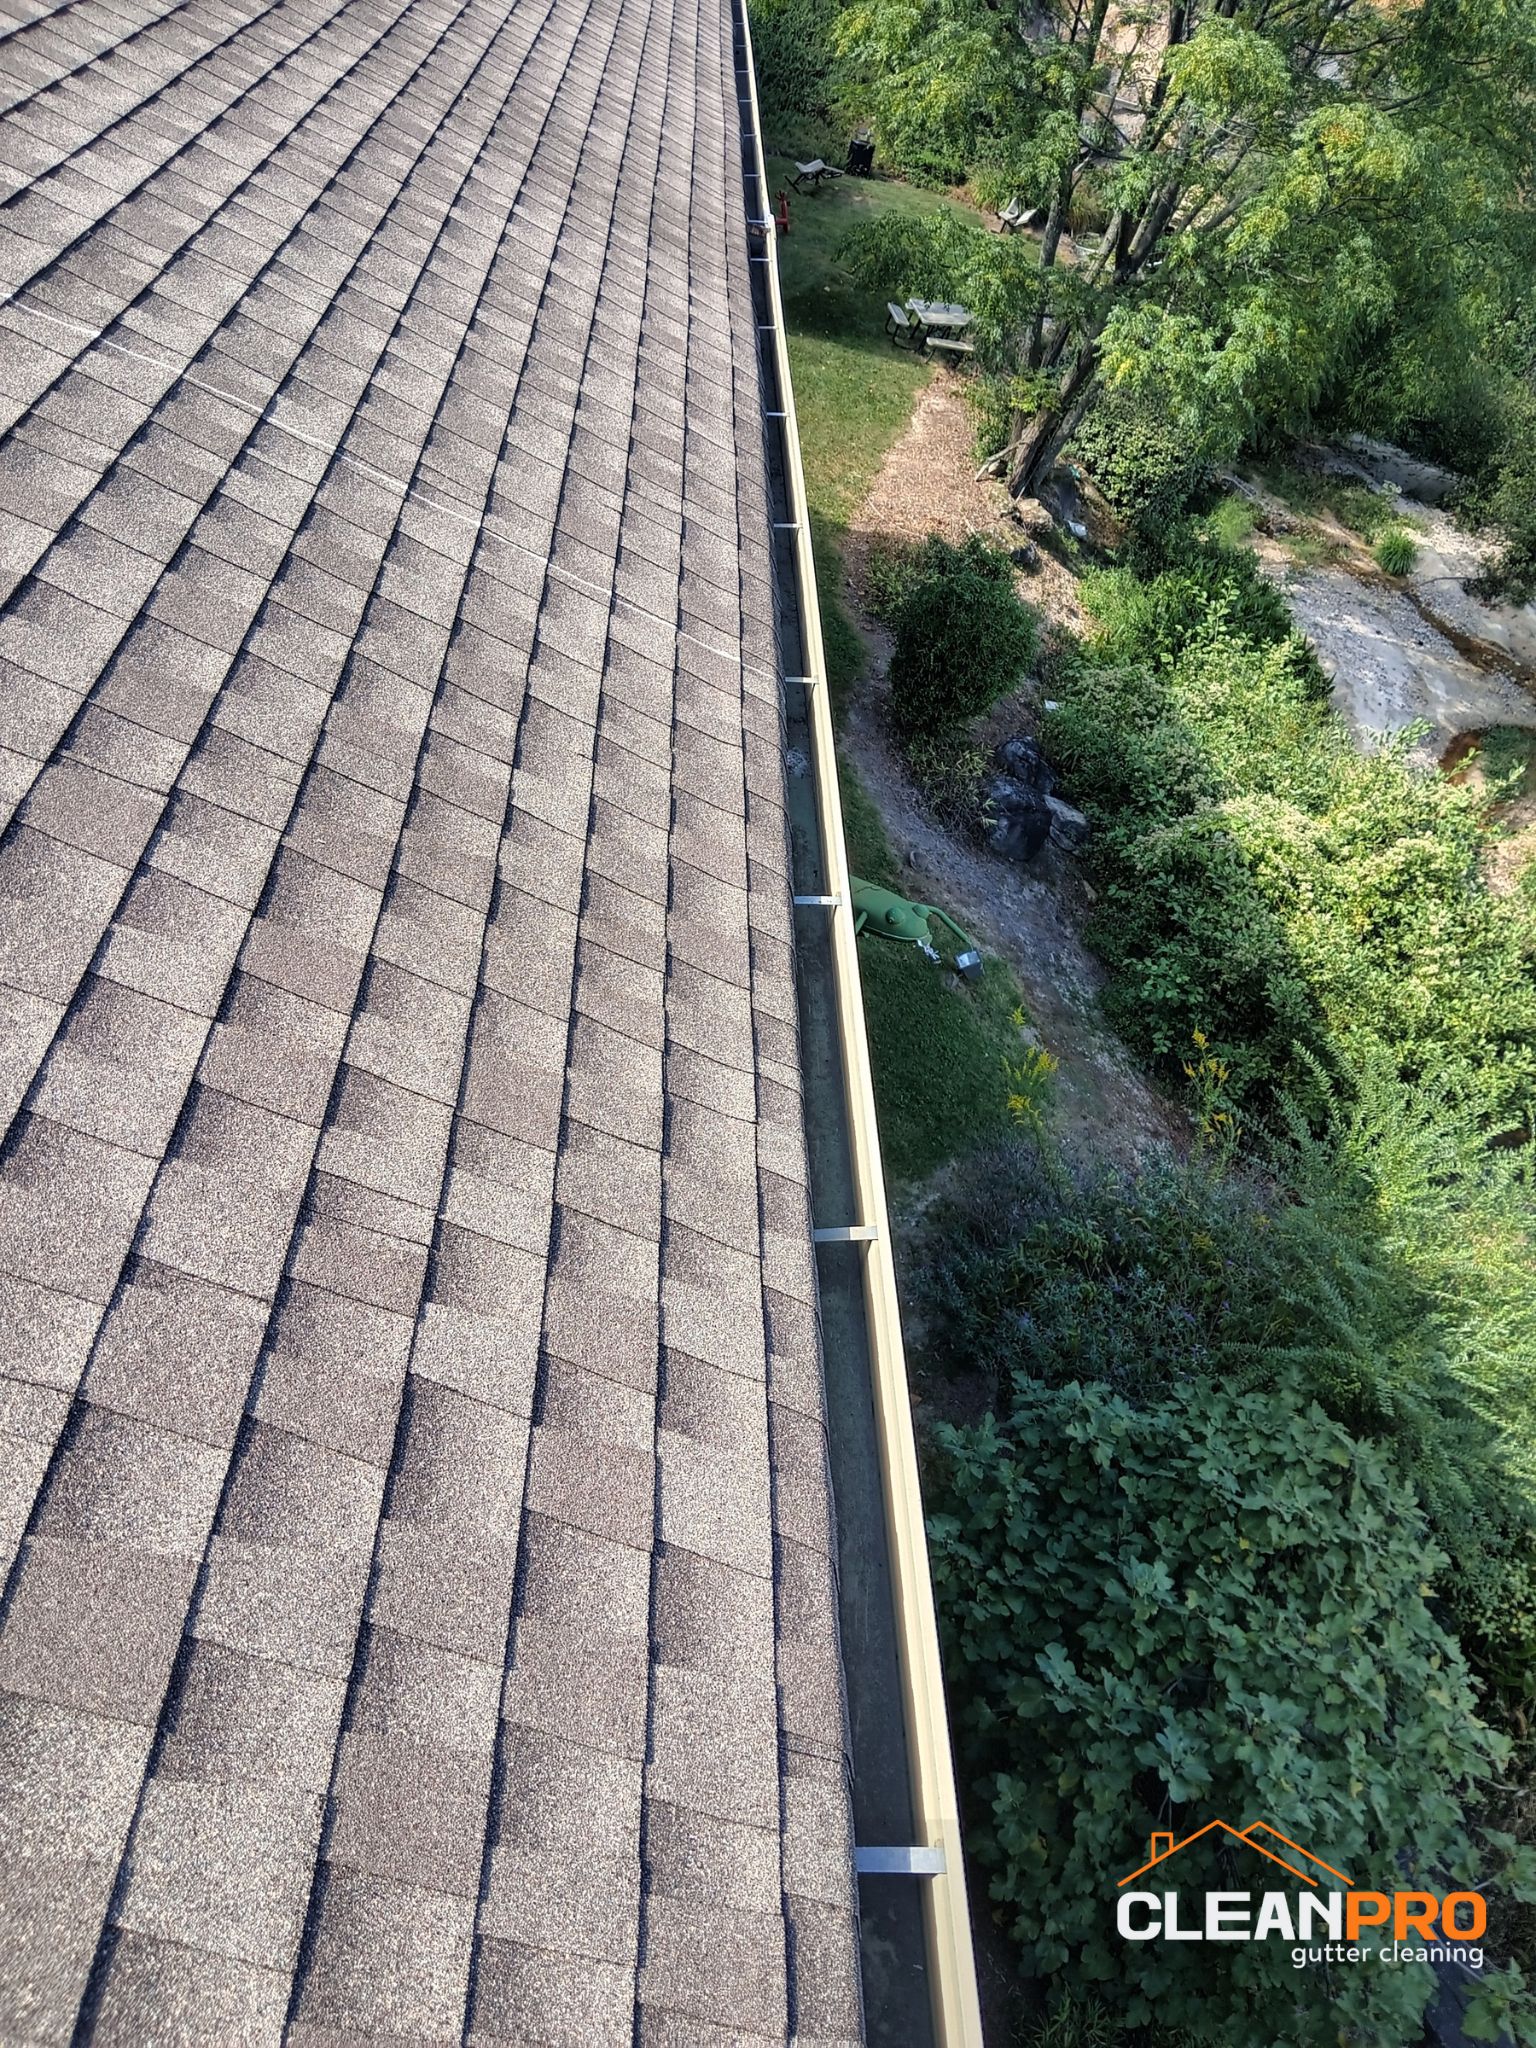 Quality Gutter Cleaning in Portland OR